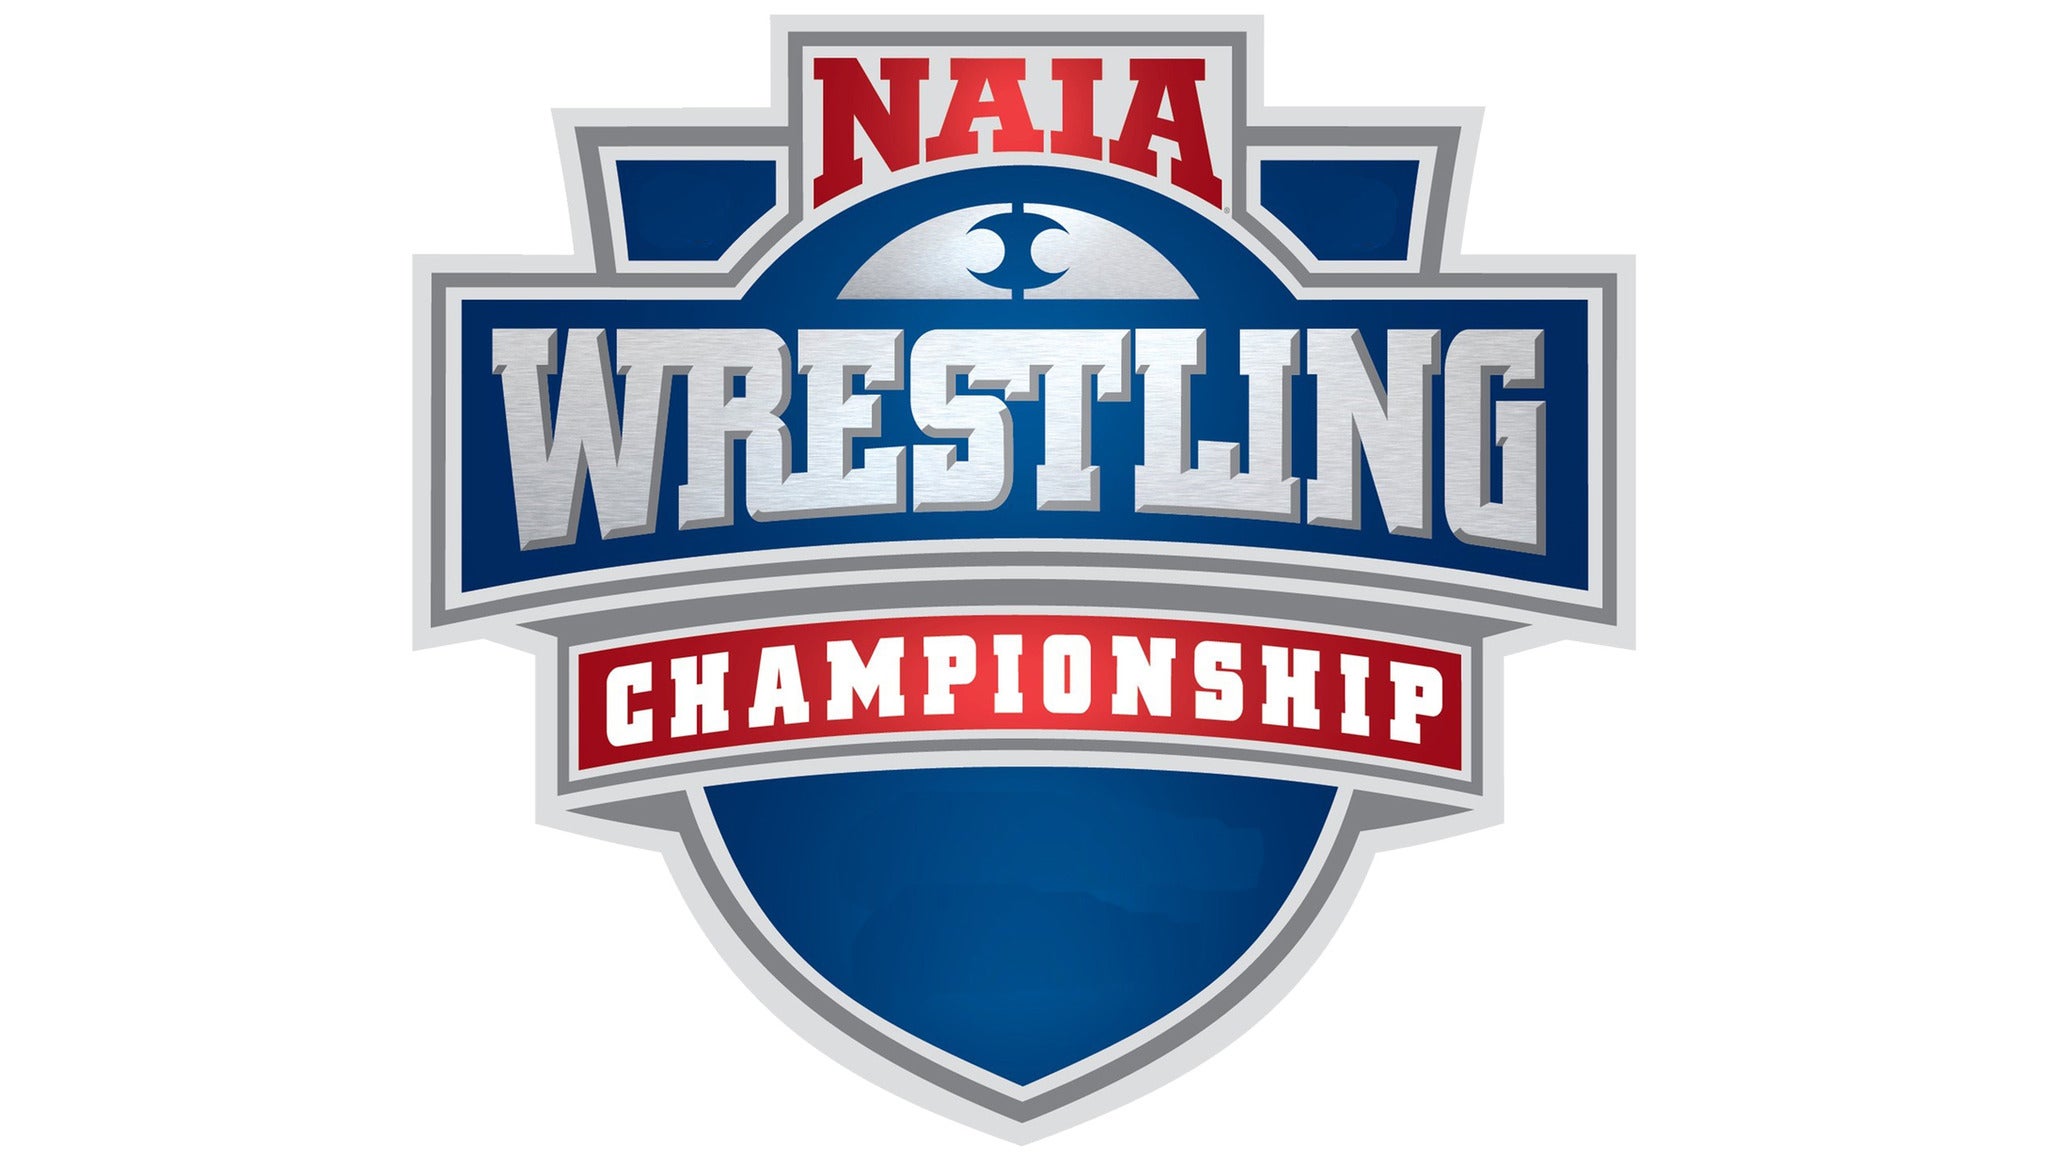 NAIA Wrestling National Championships - All Session (March 3rd-4th) in Park City promo photo for All Session presale offer code